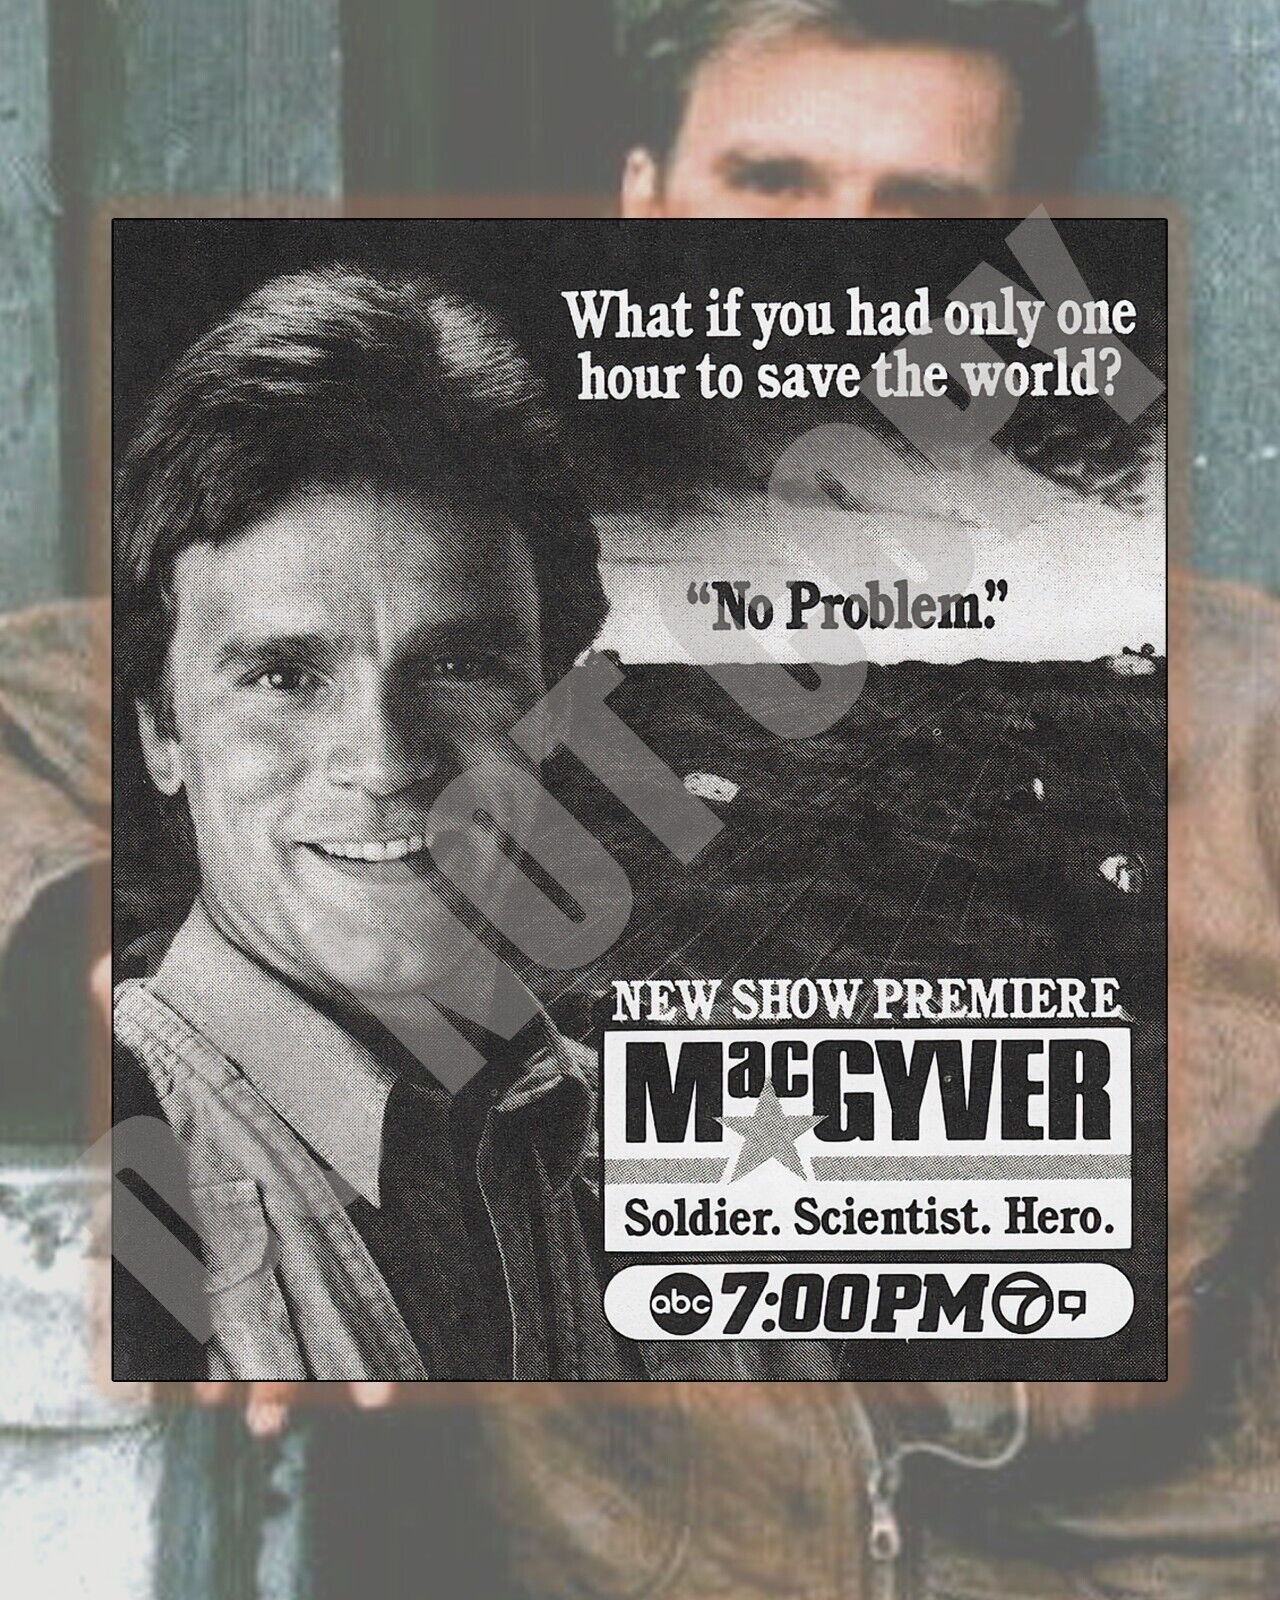 MacGyver Foundation TV Show Premiere Promo Ad Collage Wall Decor Art 8x10 Photo